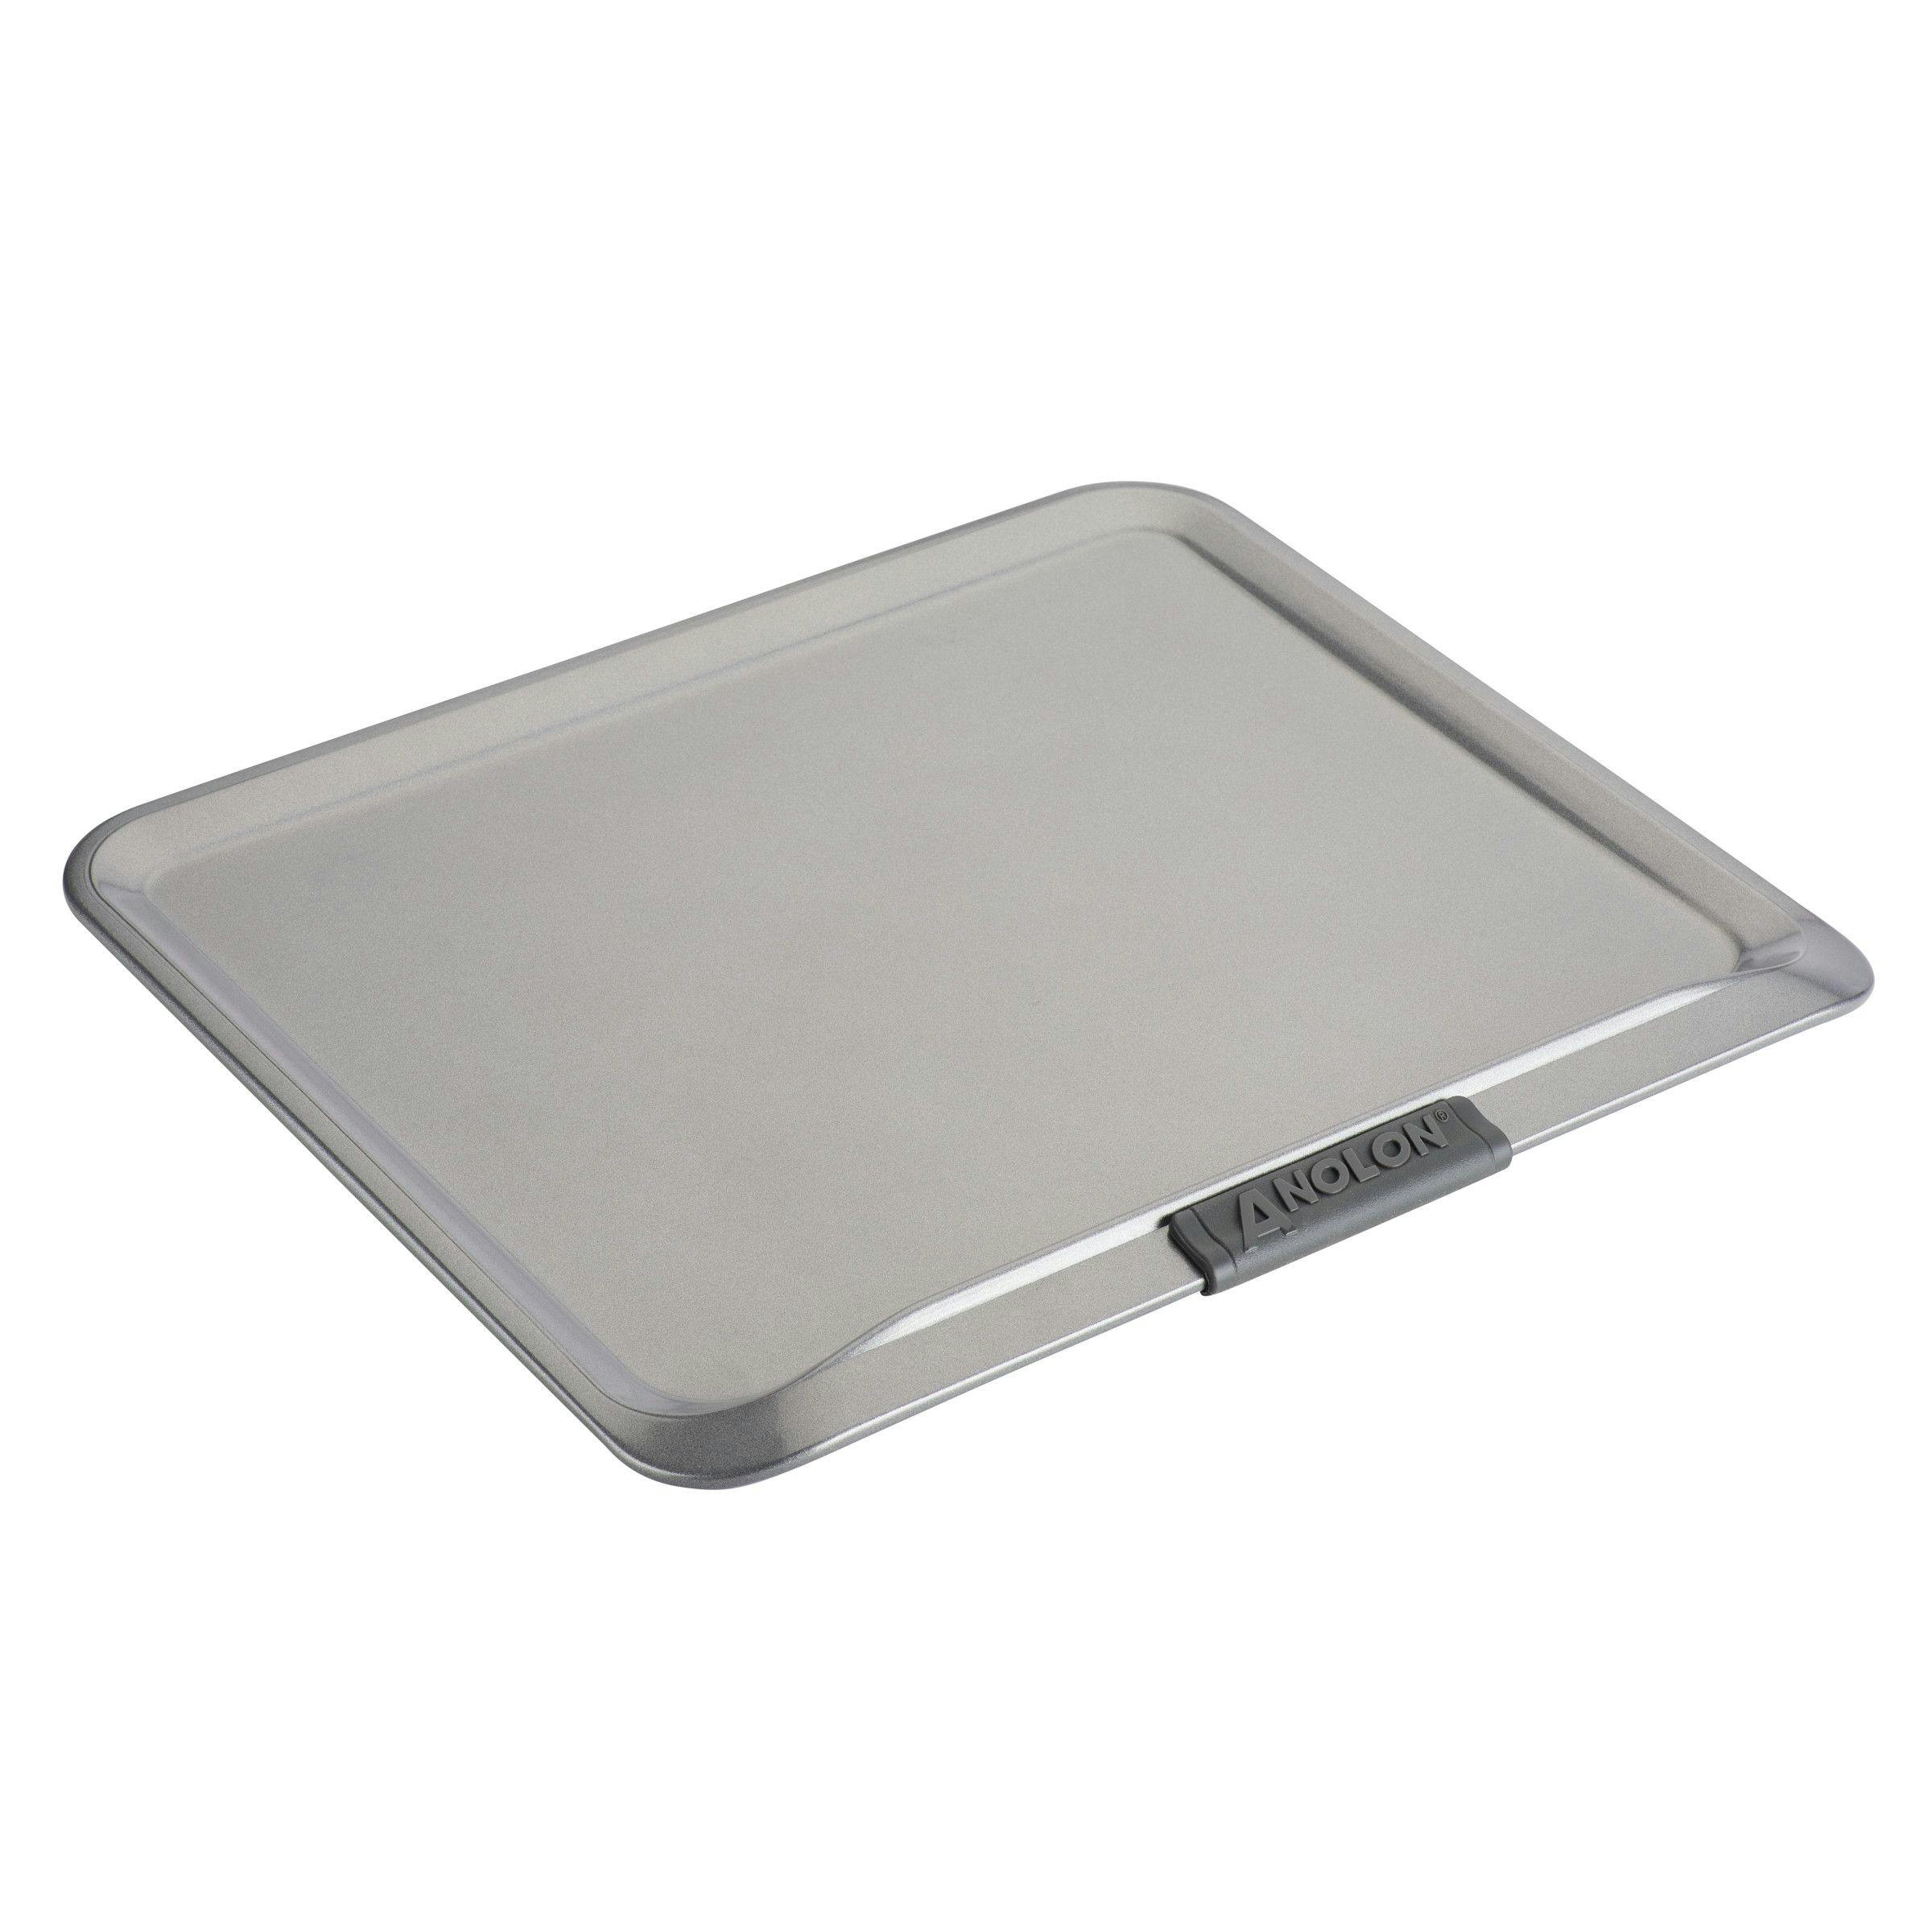 Anolon Advanced Bakeware Nonstick Cookie Sheet, 14-Inch x 16-Inch, Gray